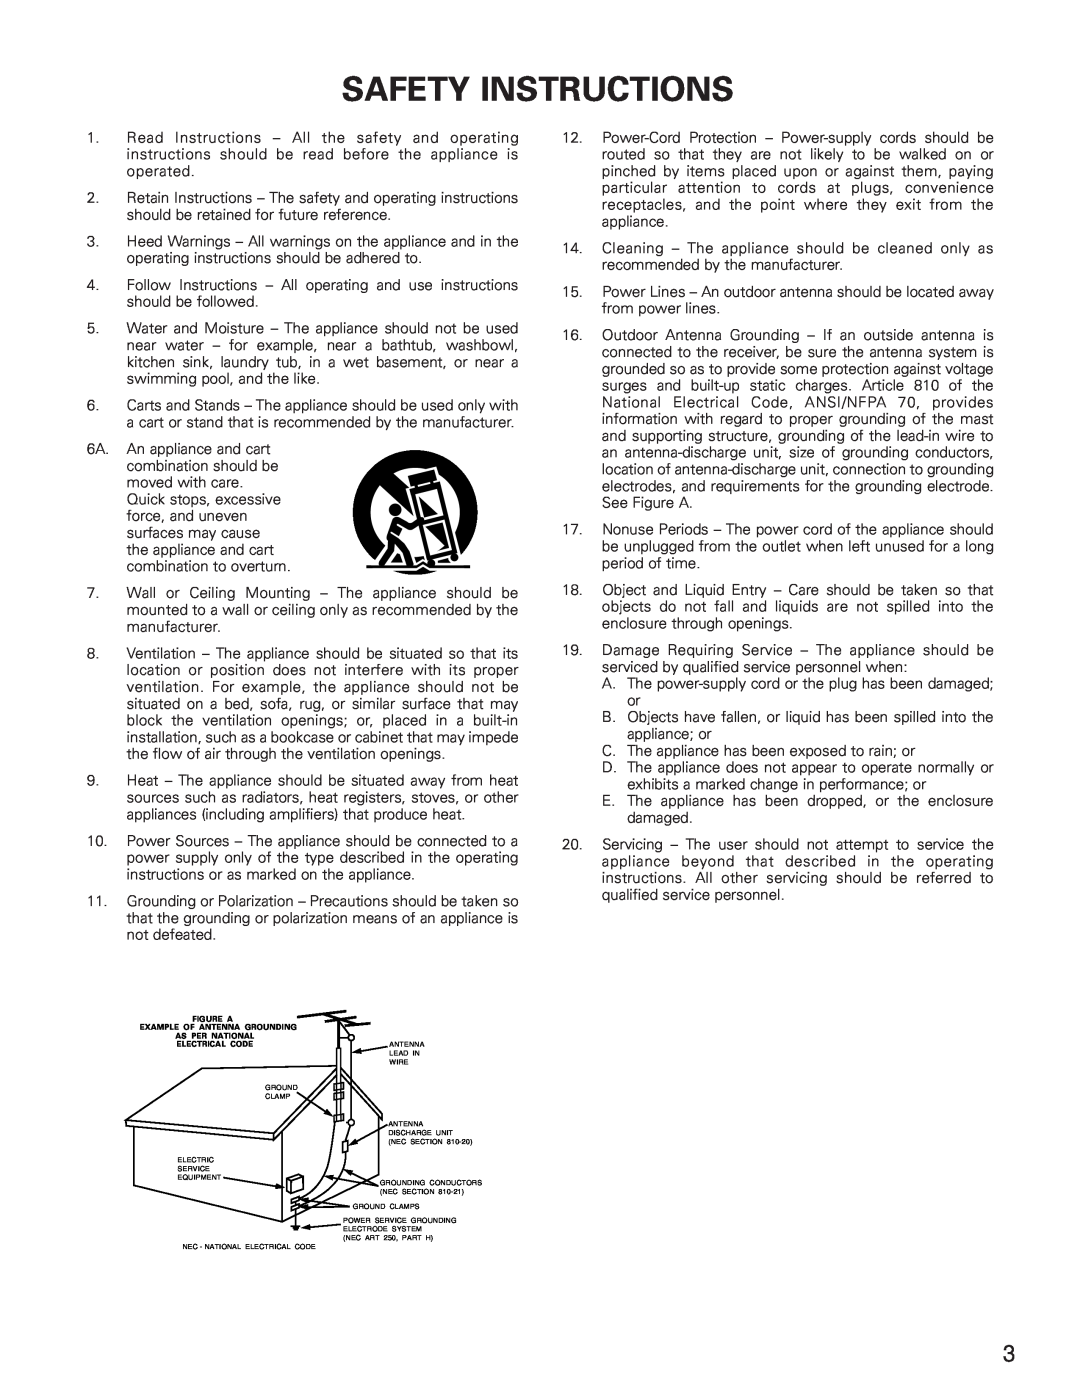 Denon AVR-5800 operating instructions Safety Instructions 